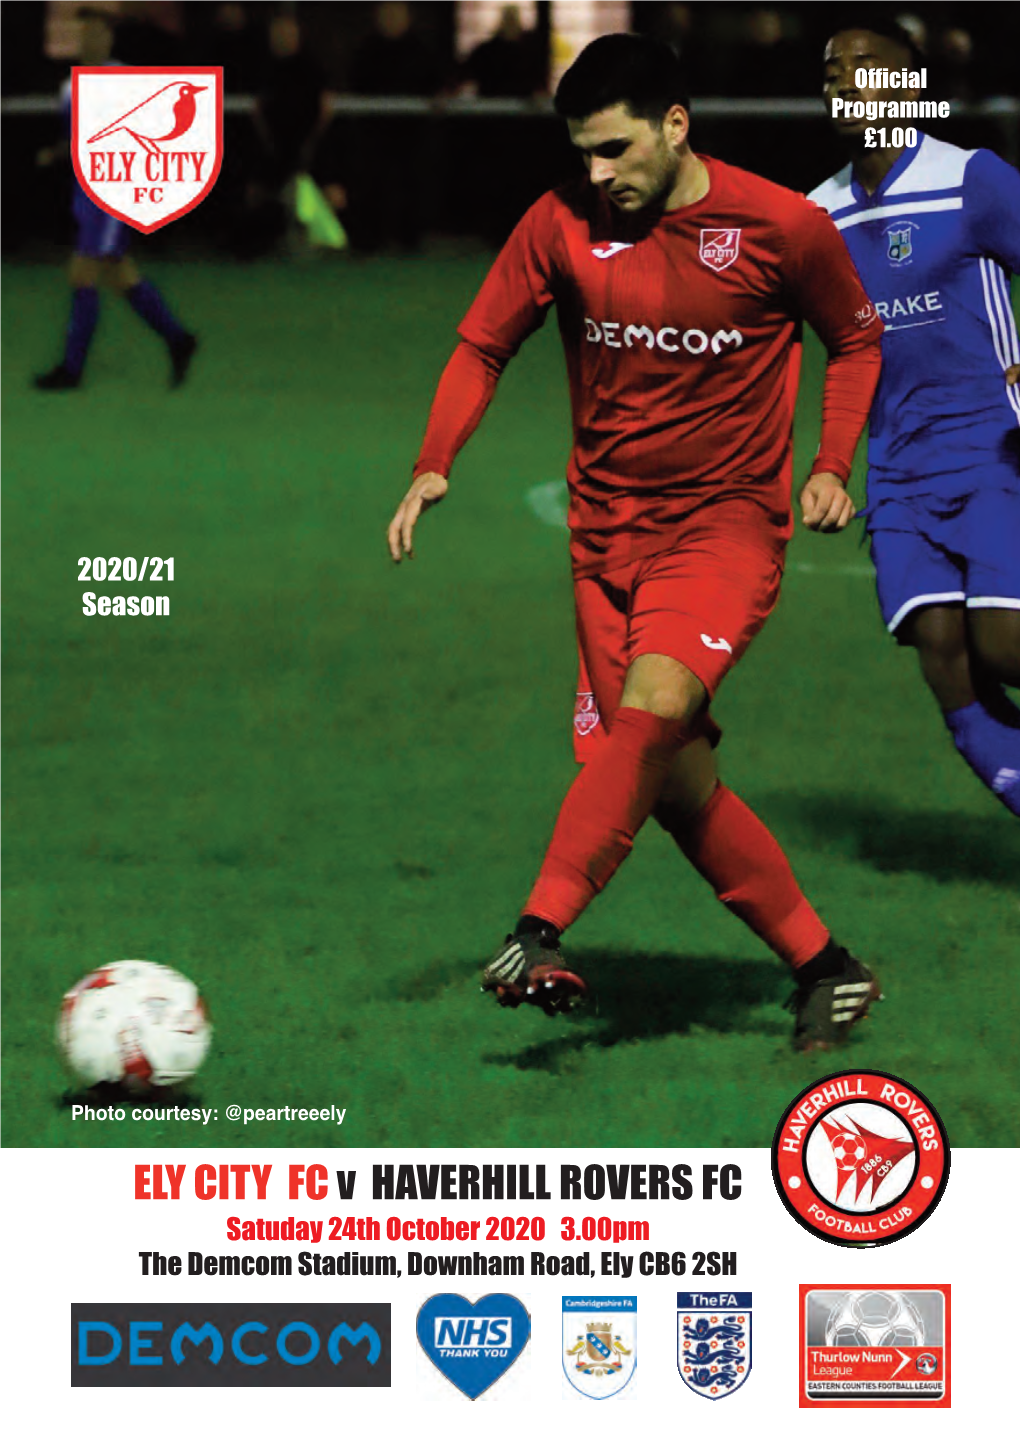 ELY CITY FC V HAVERHILL ROVERS FC